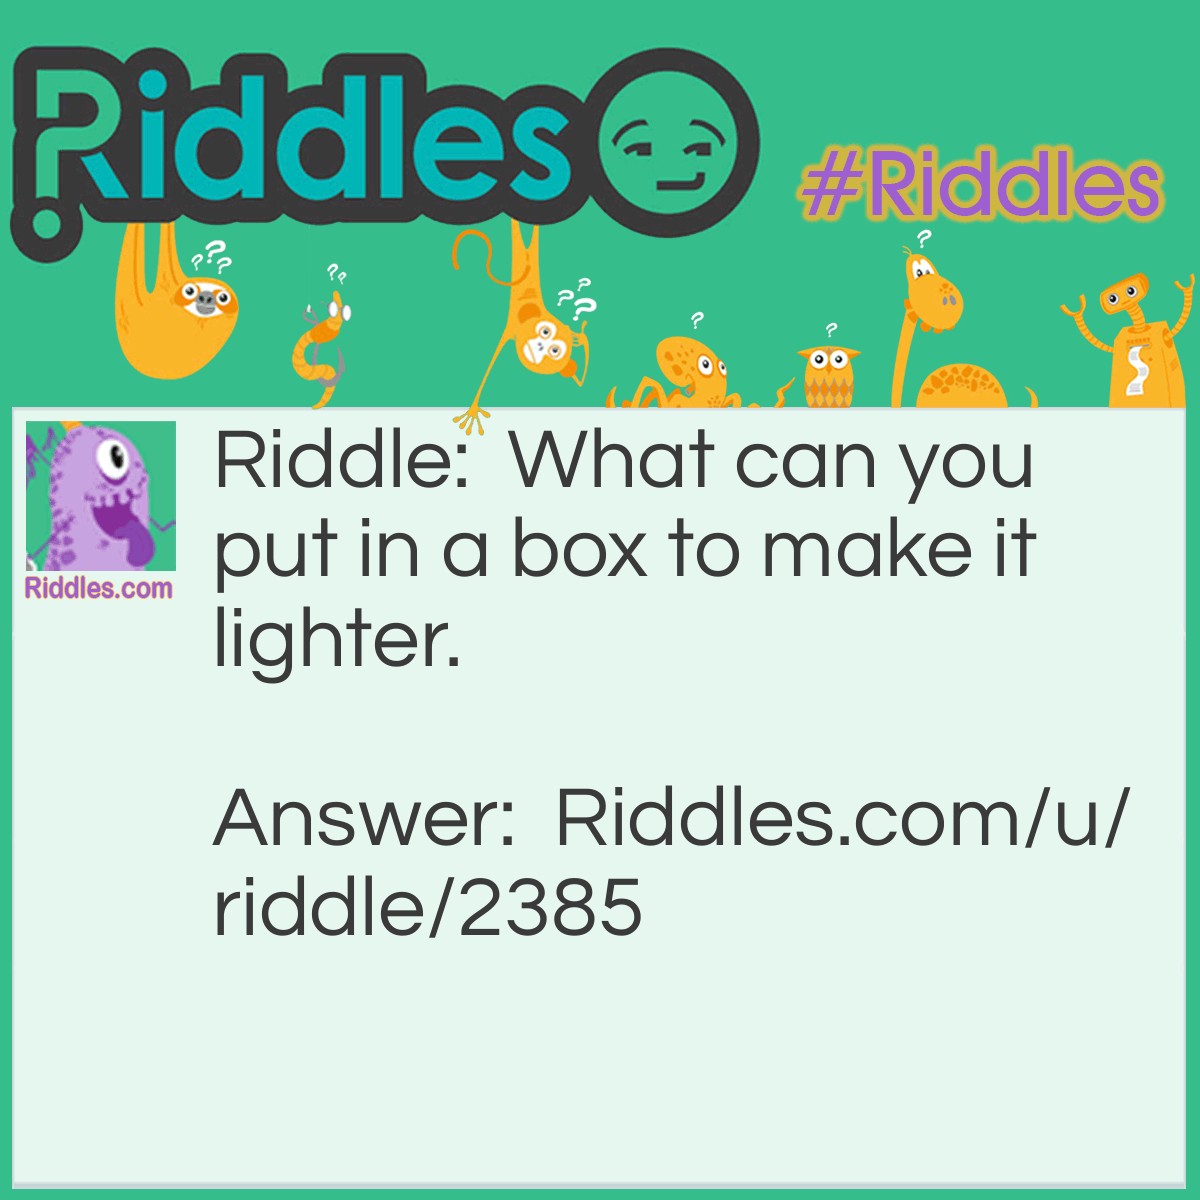 Riddle: What can you put in a box to make it lighter? Answer: Holes.